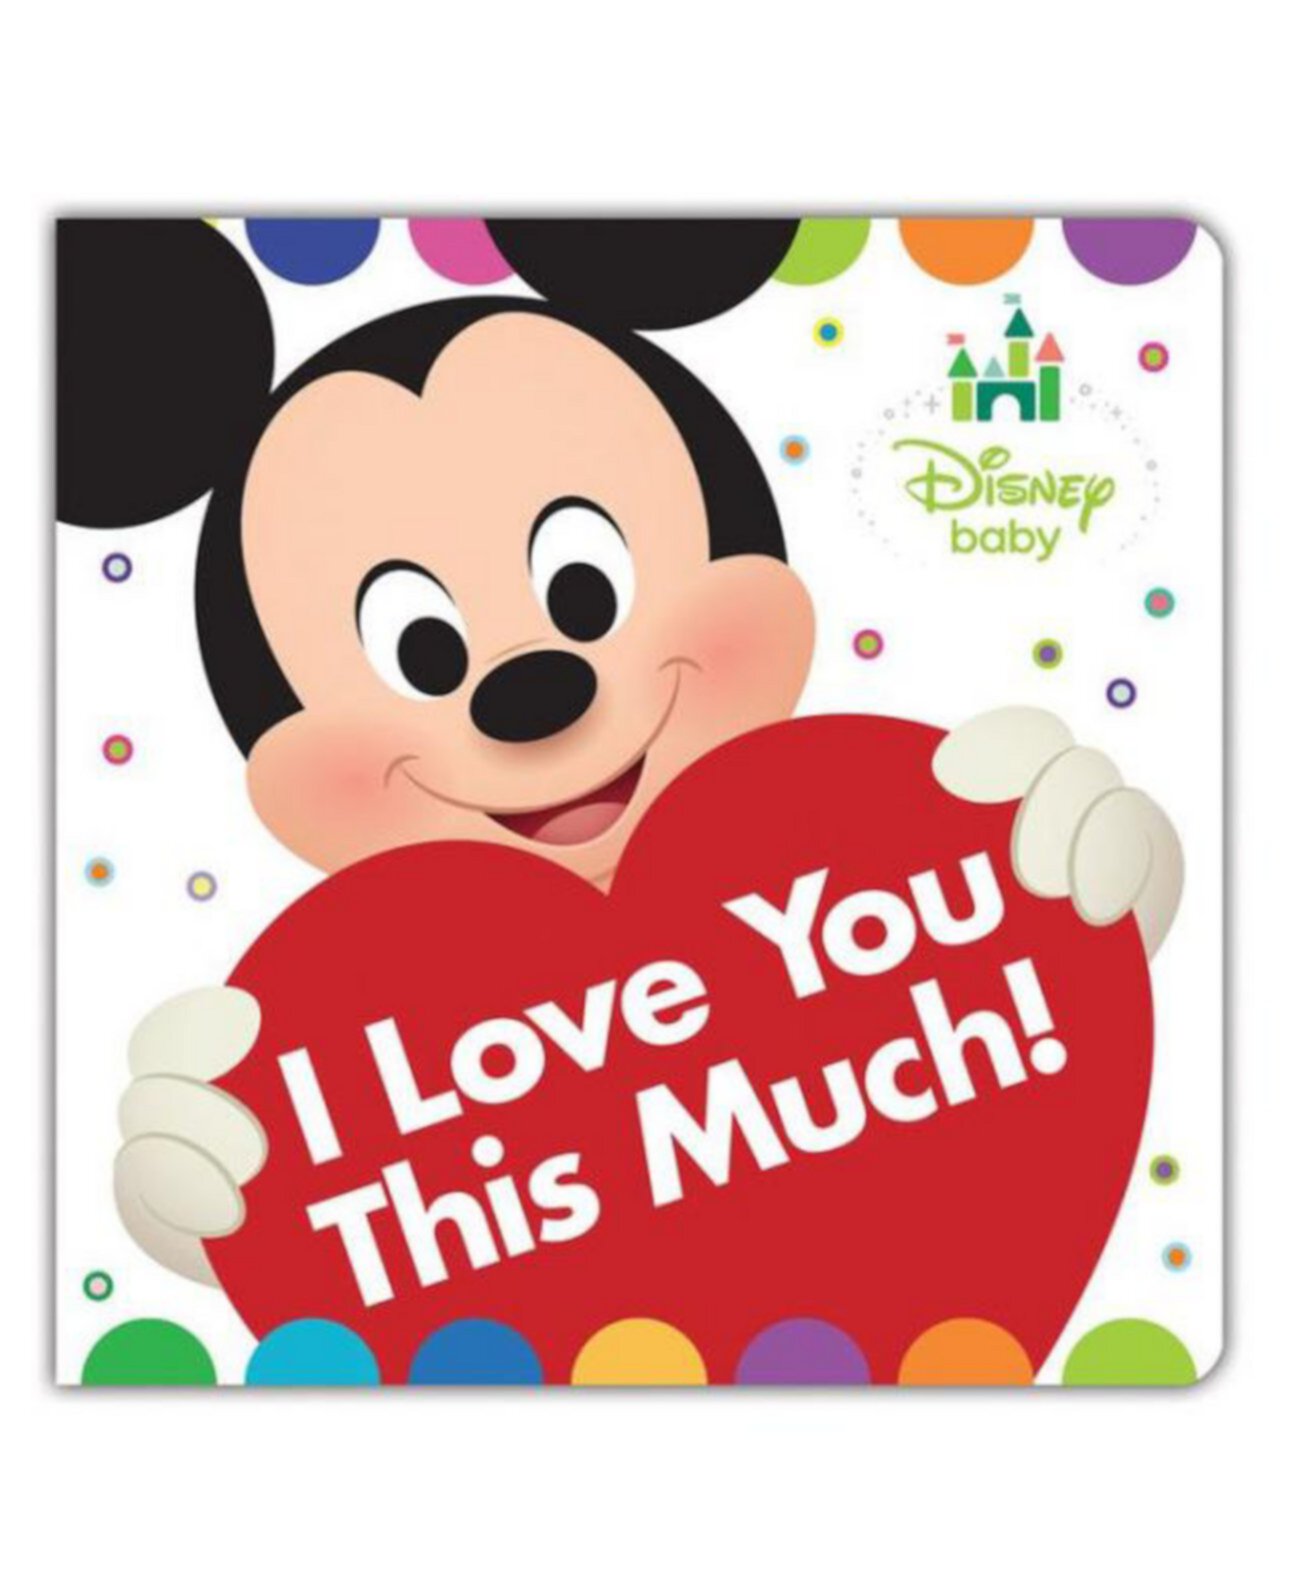 I Love You This Much Disney Baby by Disney Books Barnes & Noble